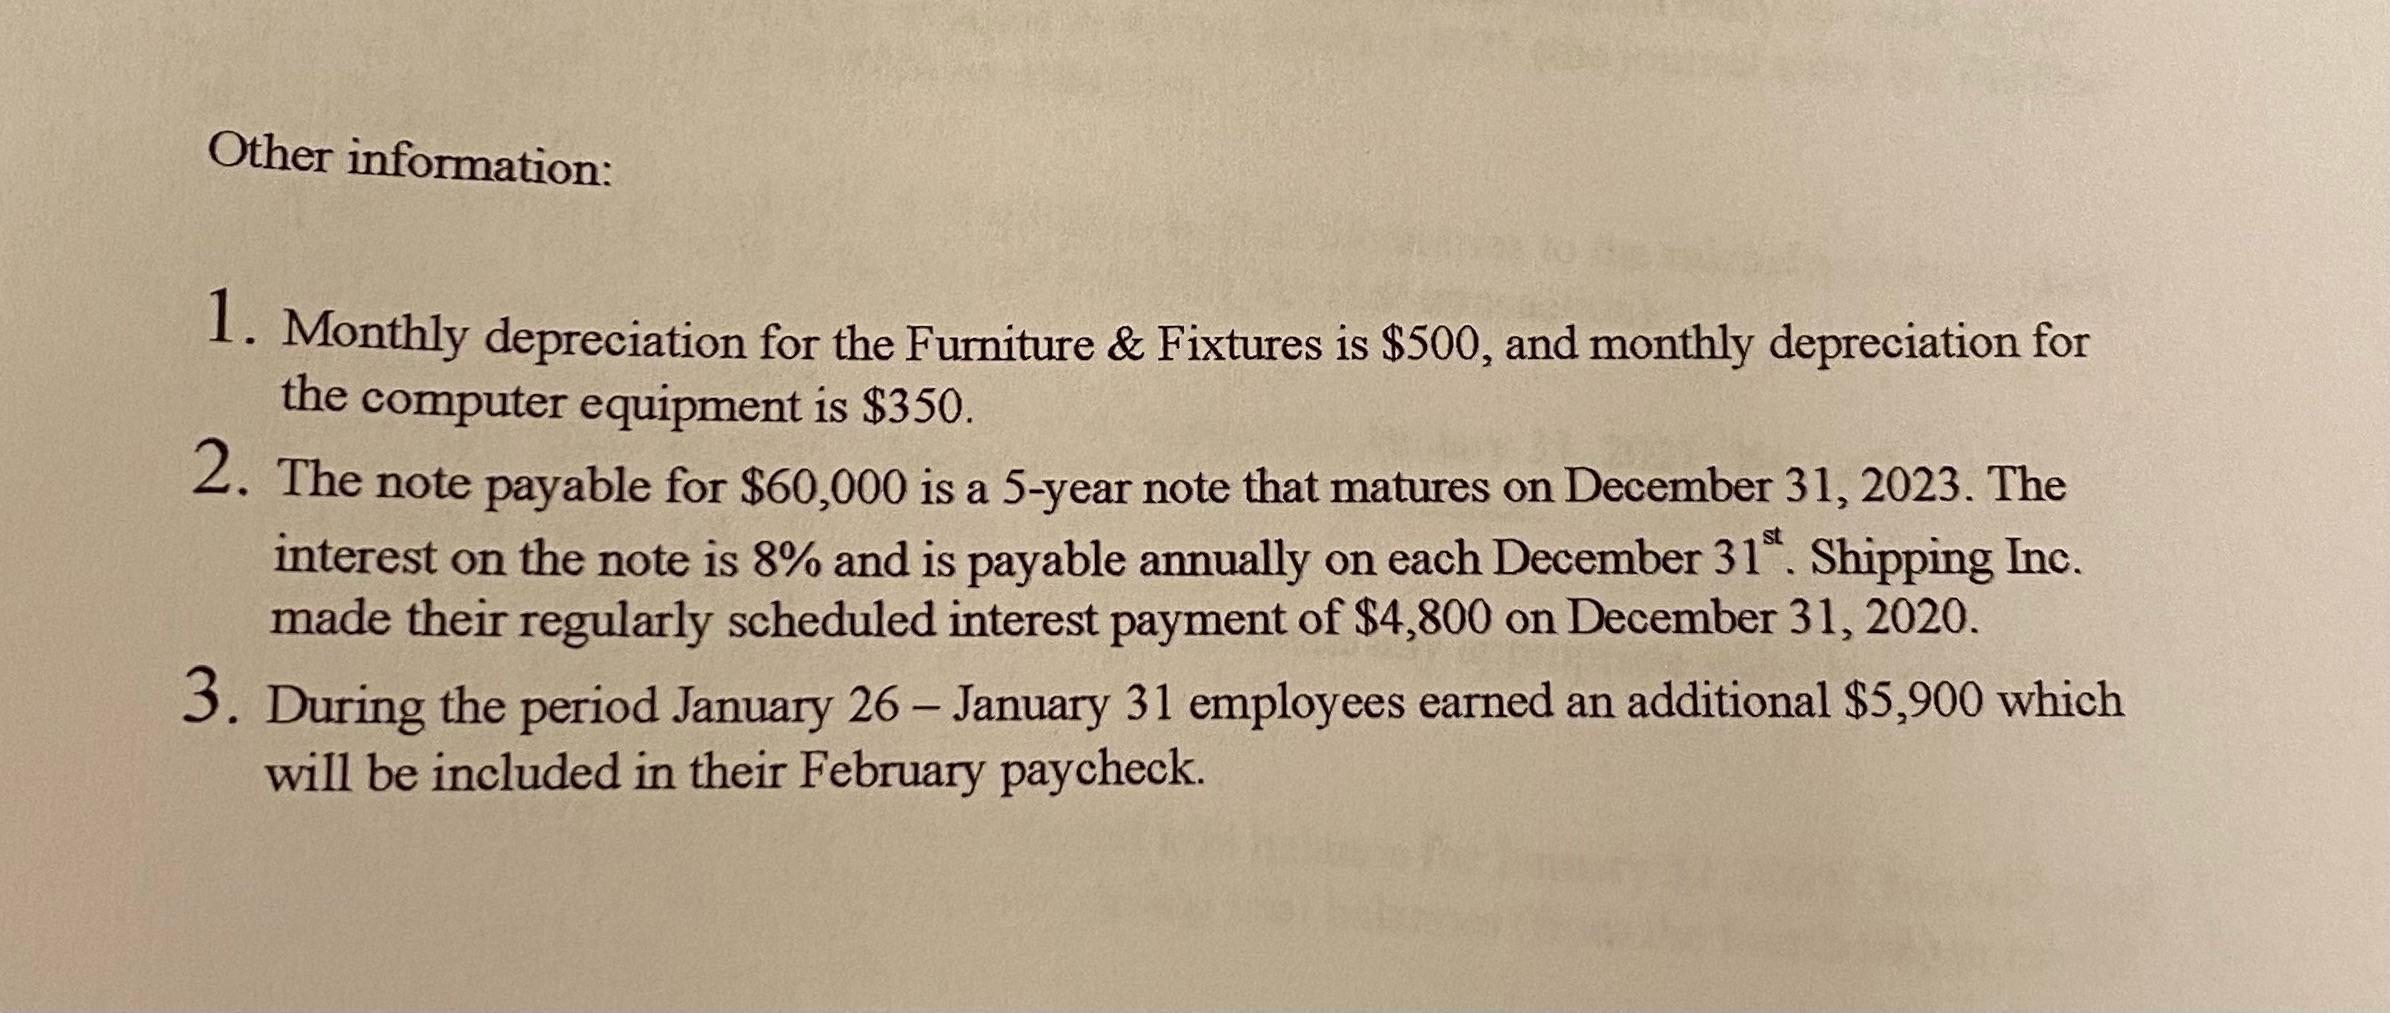 Other information: 1. Monthly depreciation for the Furniture & Fixtures is $500, and monthly depreciation for the computer eq